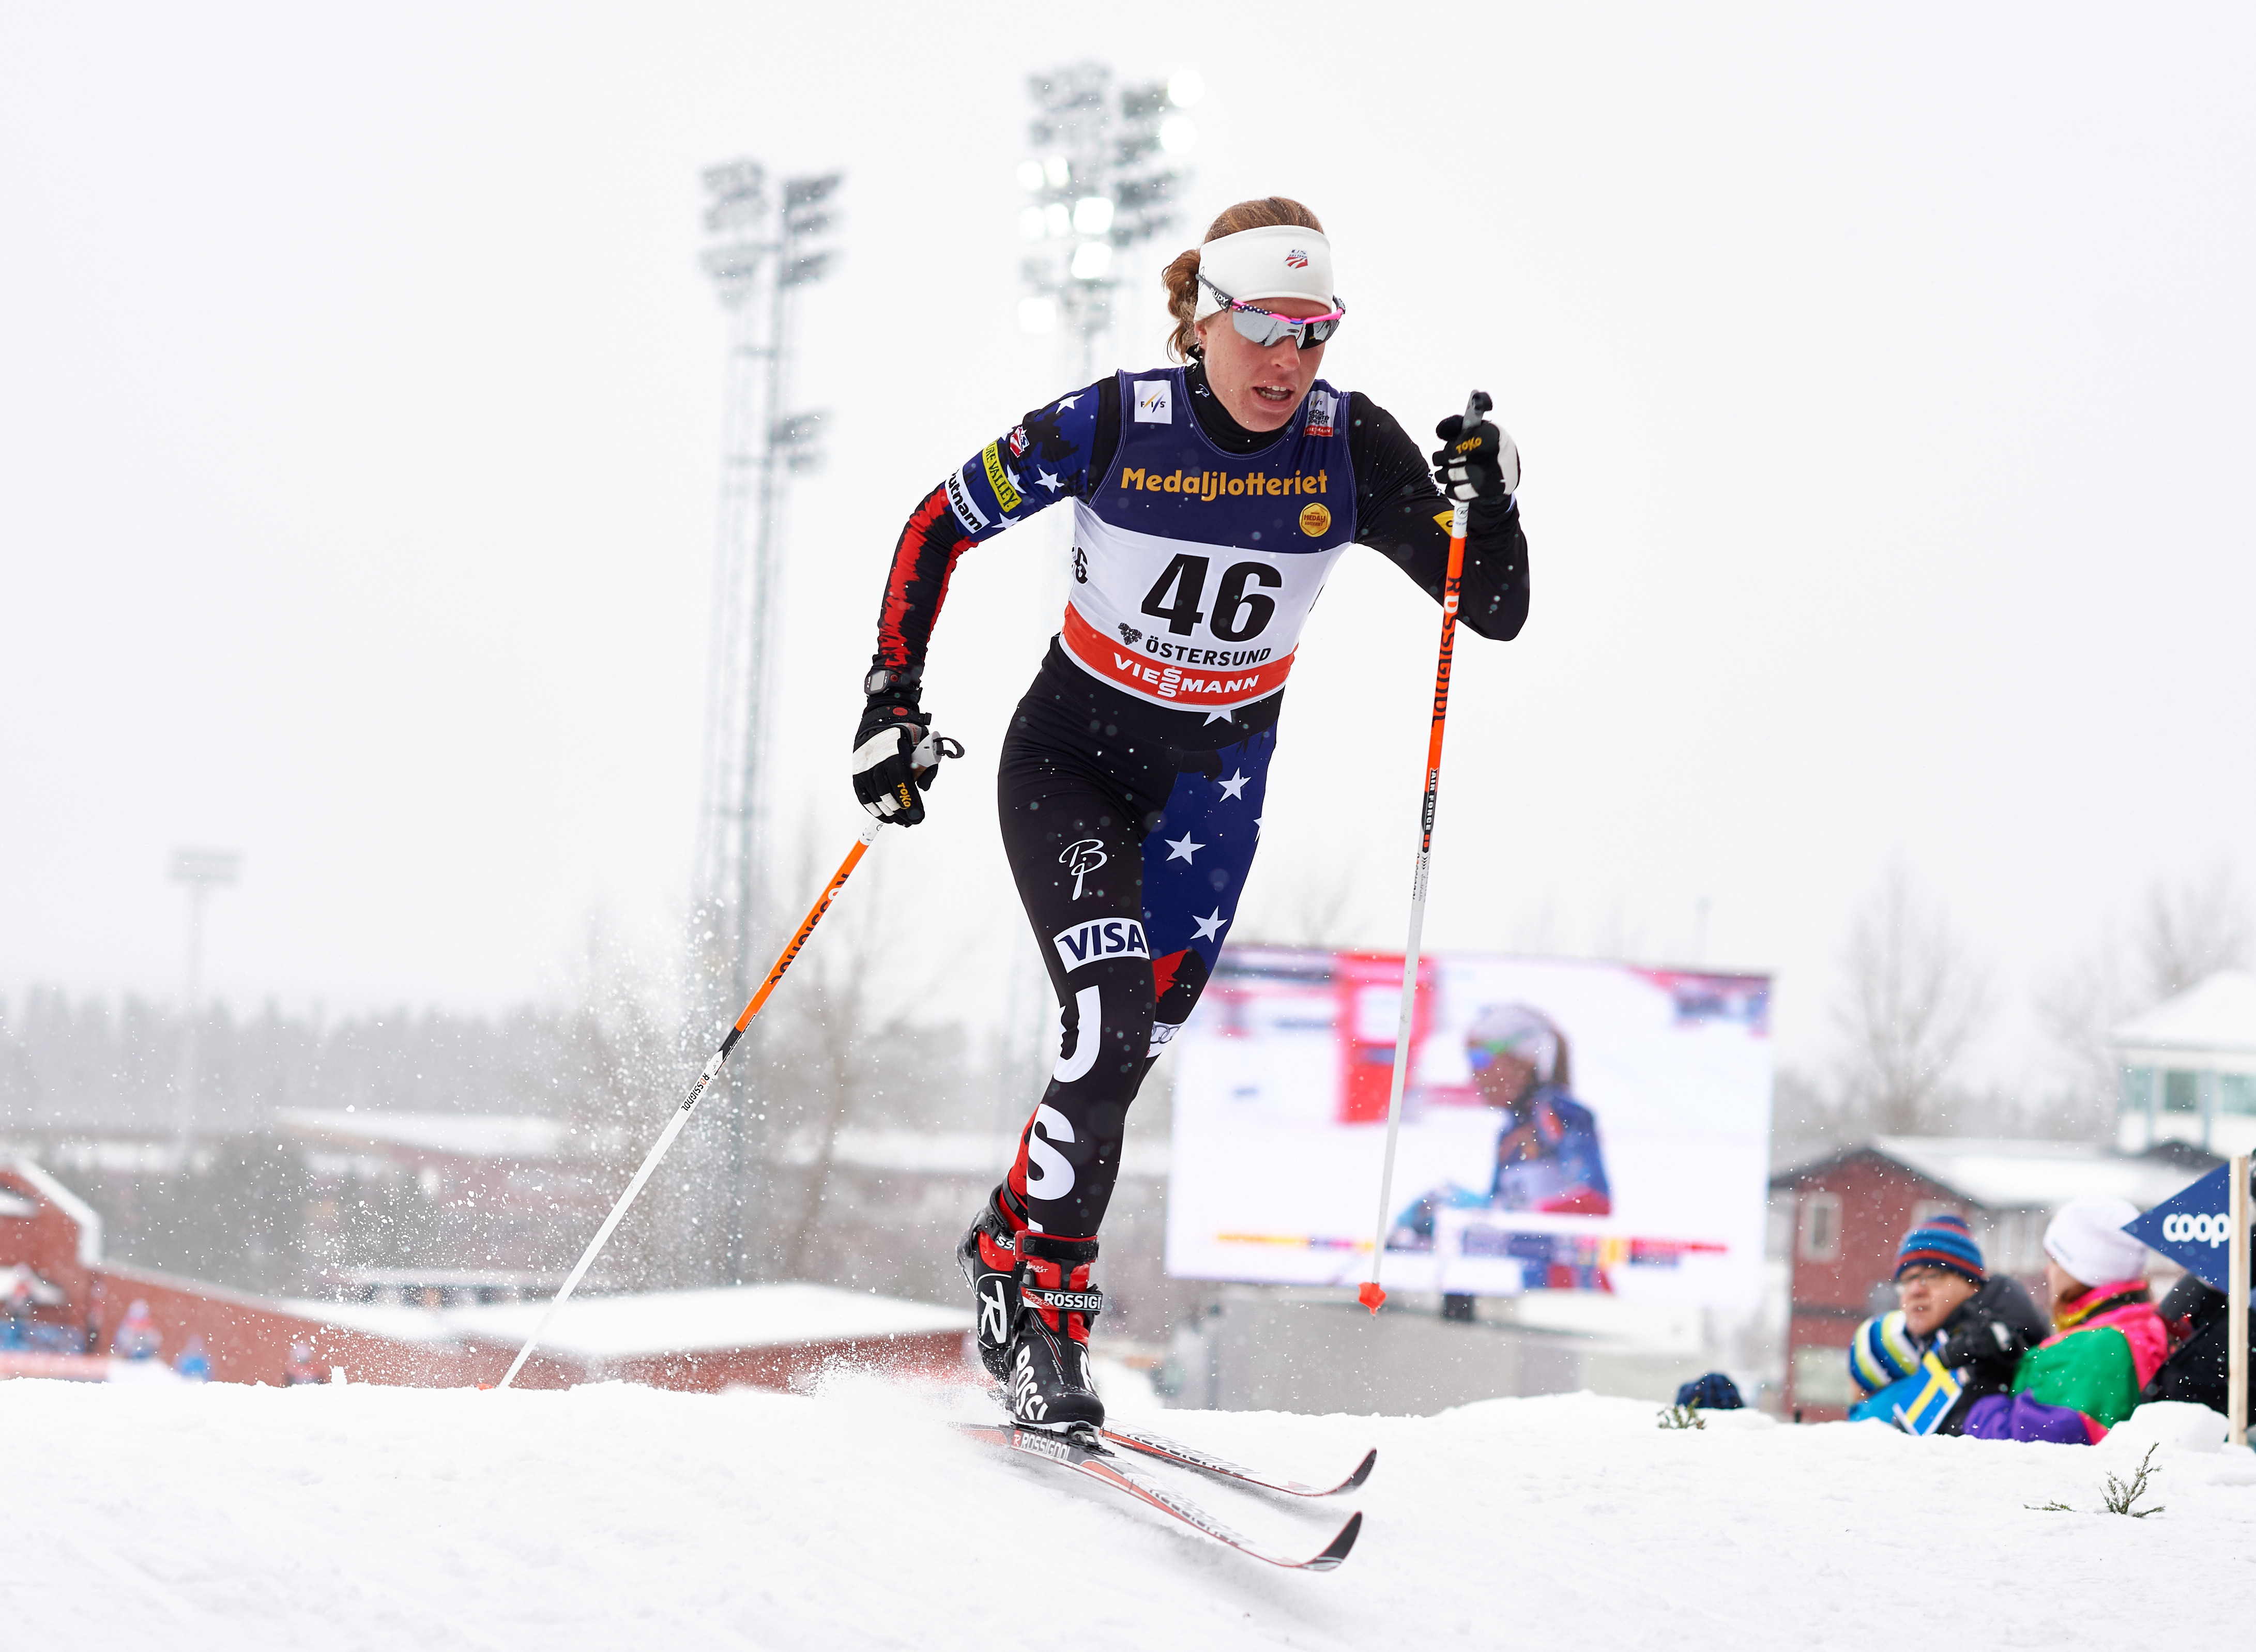 Hamilton Takes 11th, Newell 12th to Lead Americans in Östersund Sprint